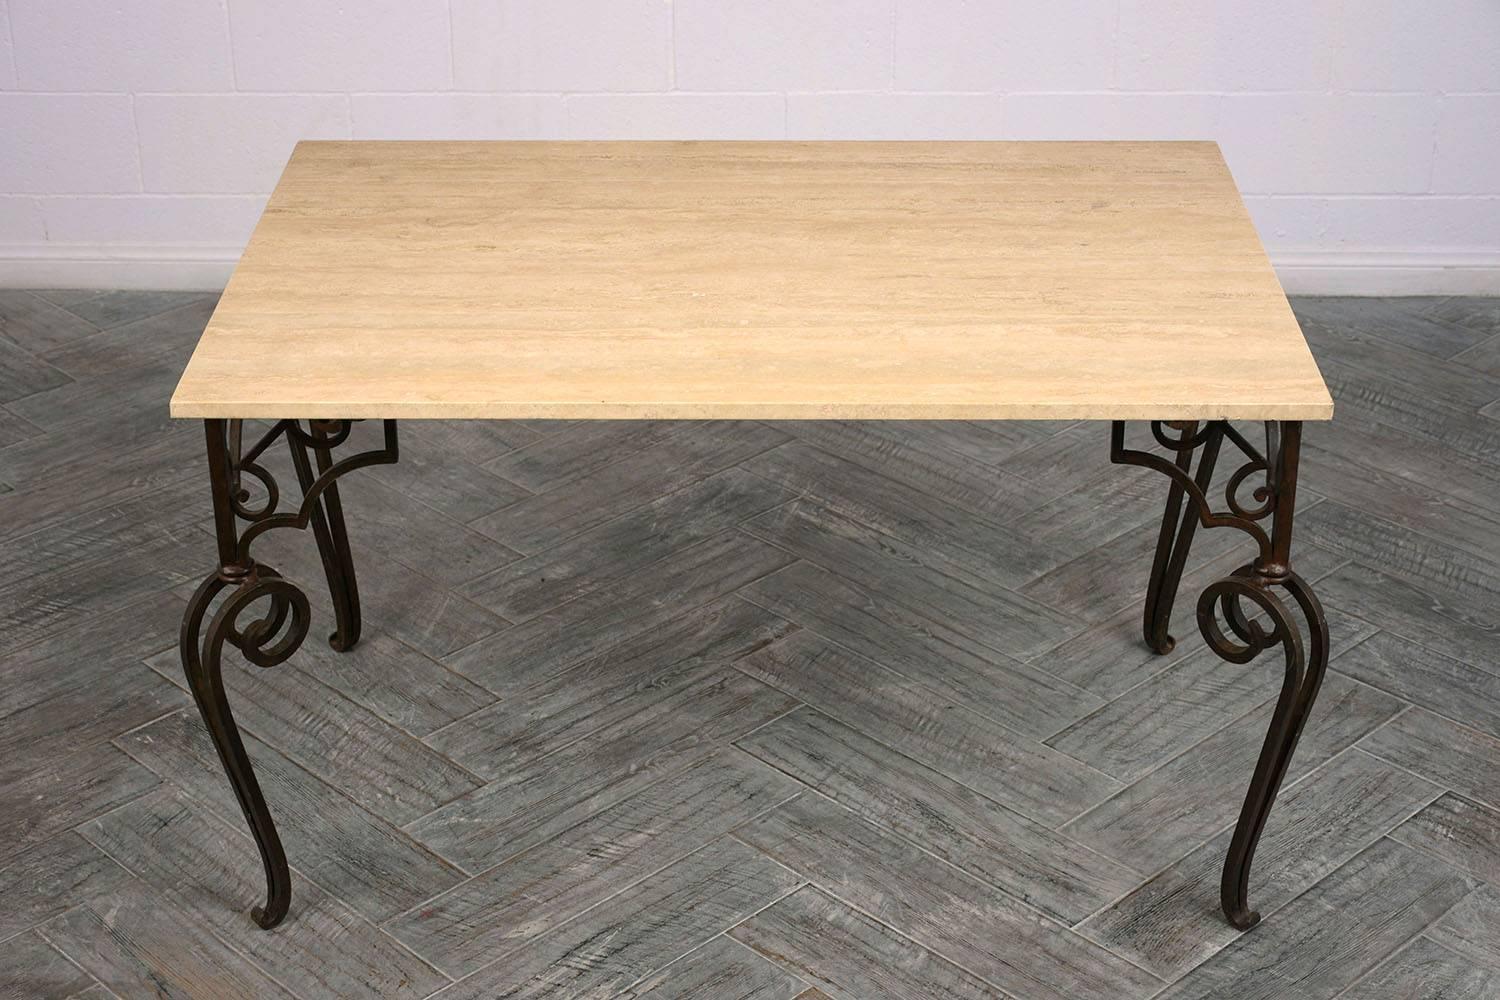 This 1970s Spanish style dining table features a wrought iron base and travertine top. The base is has scrolled legs with ornate buttress supports and a rustic finish. The travertine top is 3/4 inch thick with a rough edge. This dining table is